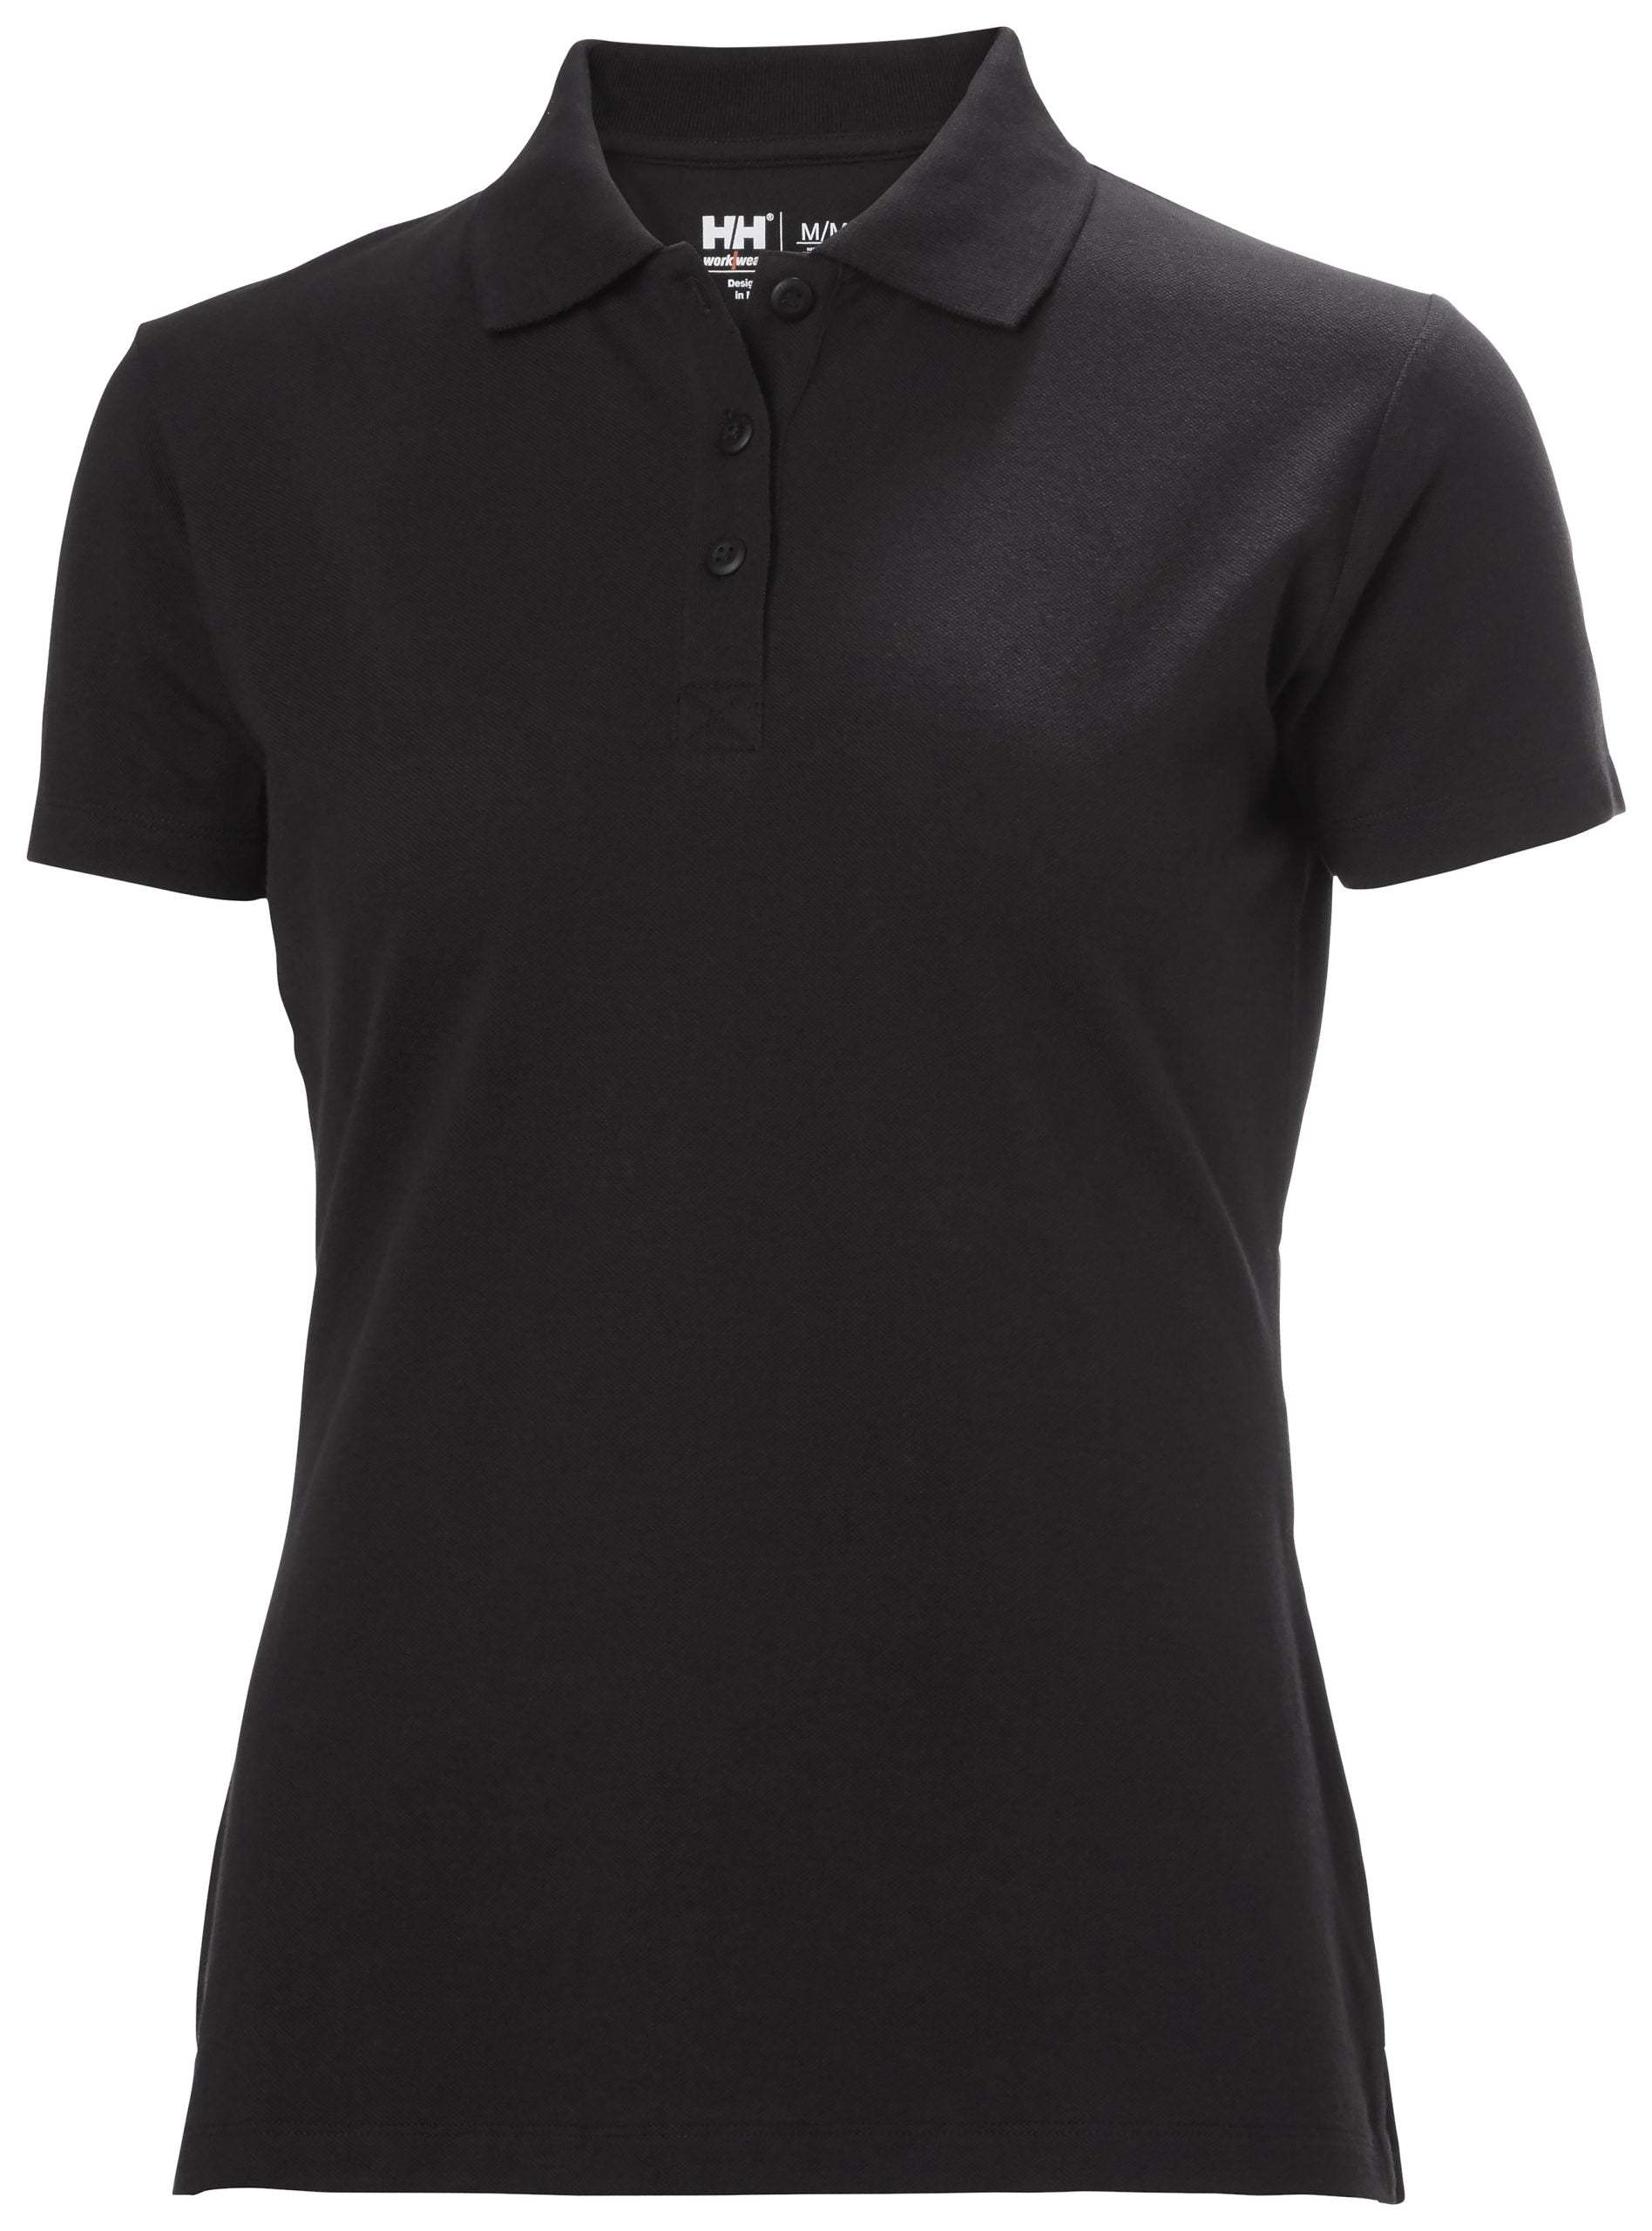 Helly Hansen Women’s Classic Polo - The Luxury Promotional Gifts Company Limited